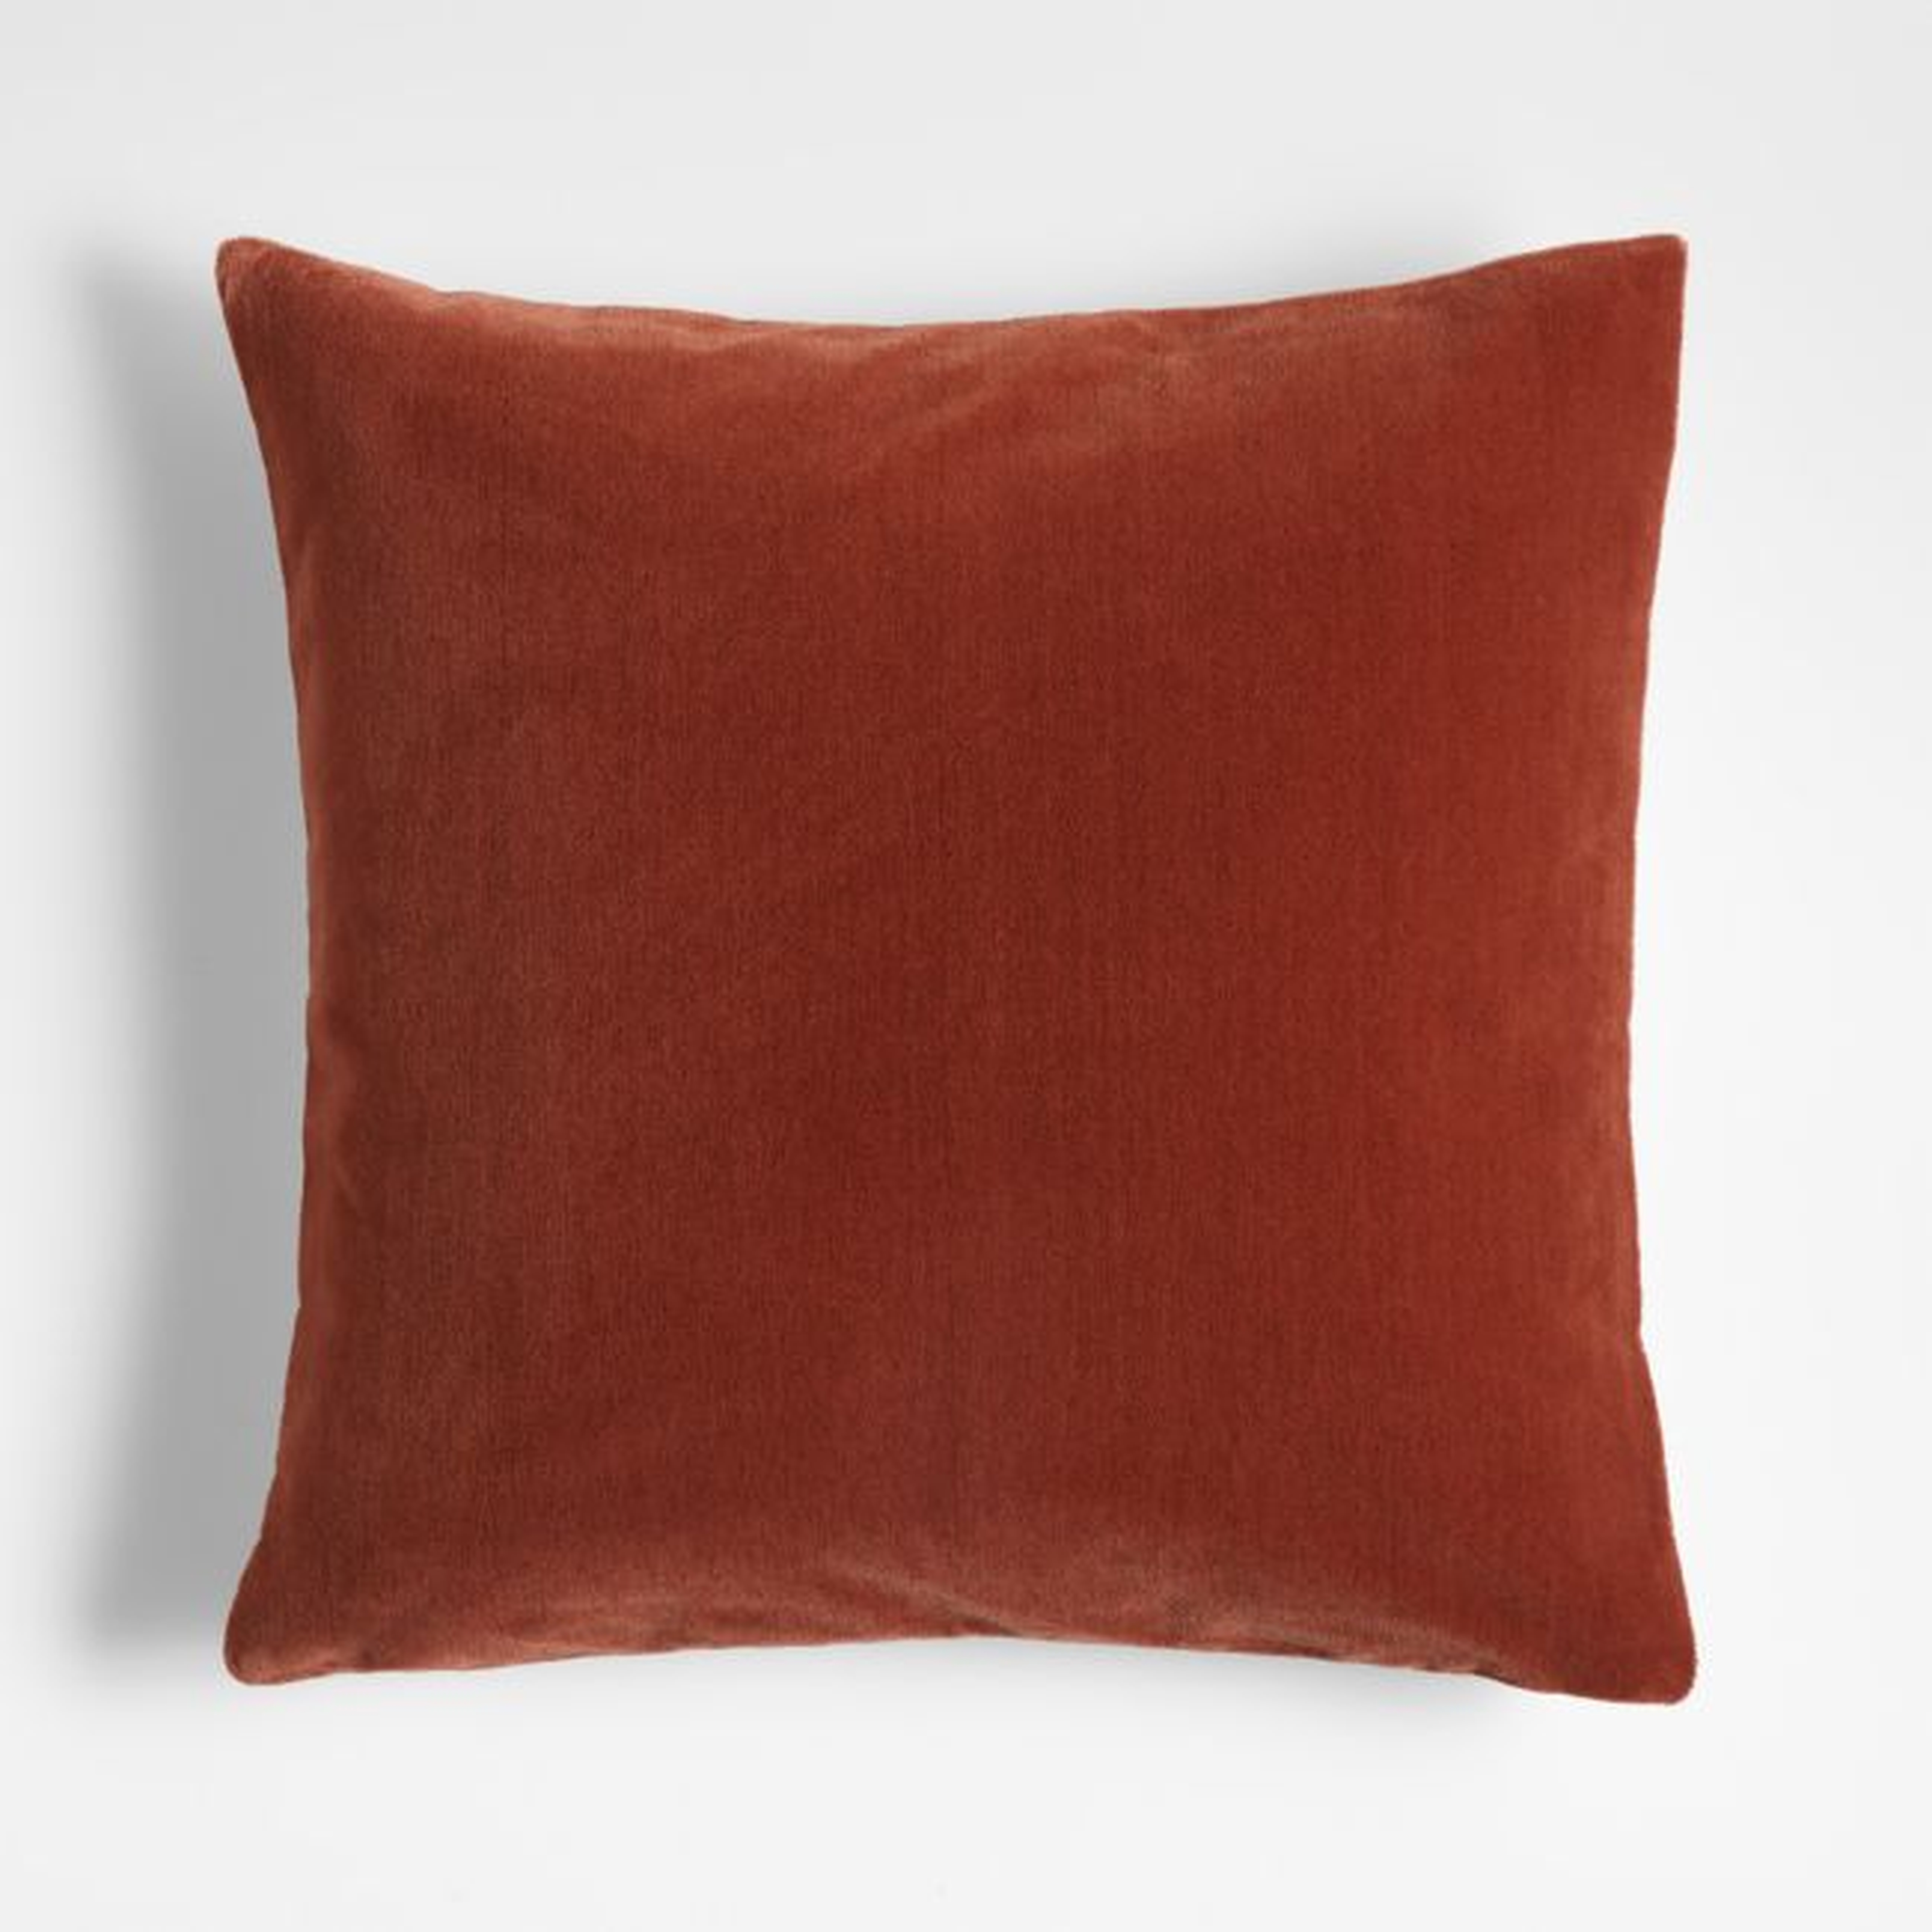 Terracotta 20"x20" Faux Mohair Throw Pillow with Feather Insert - Crate and Barrel